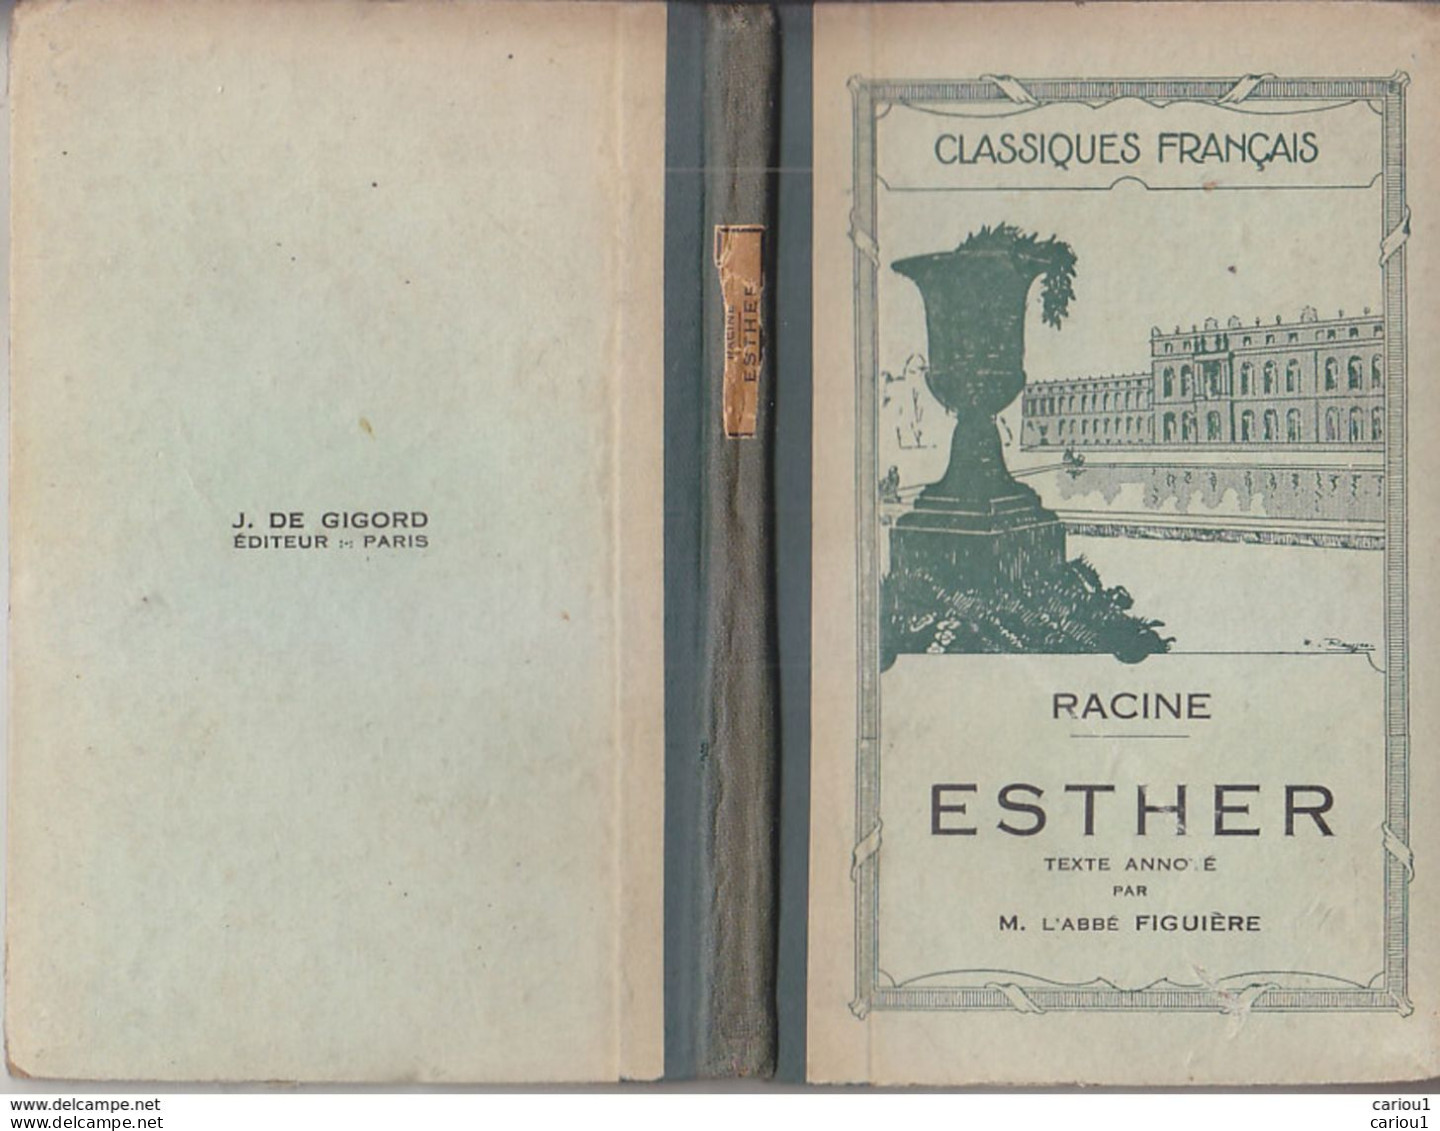 C1  RACINE - ESTHER Classiques GIGORD 1932 Relie ABBE FIGUIERE Port INCLUS France - French Authors